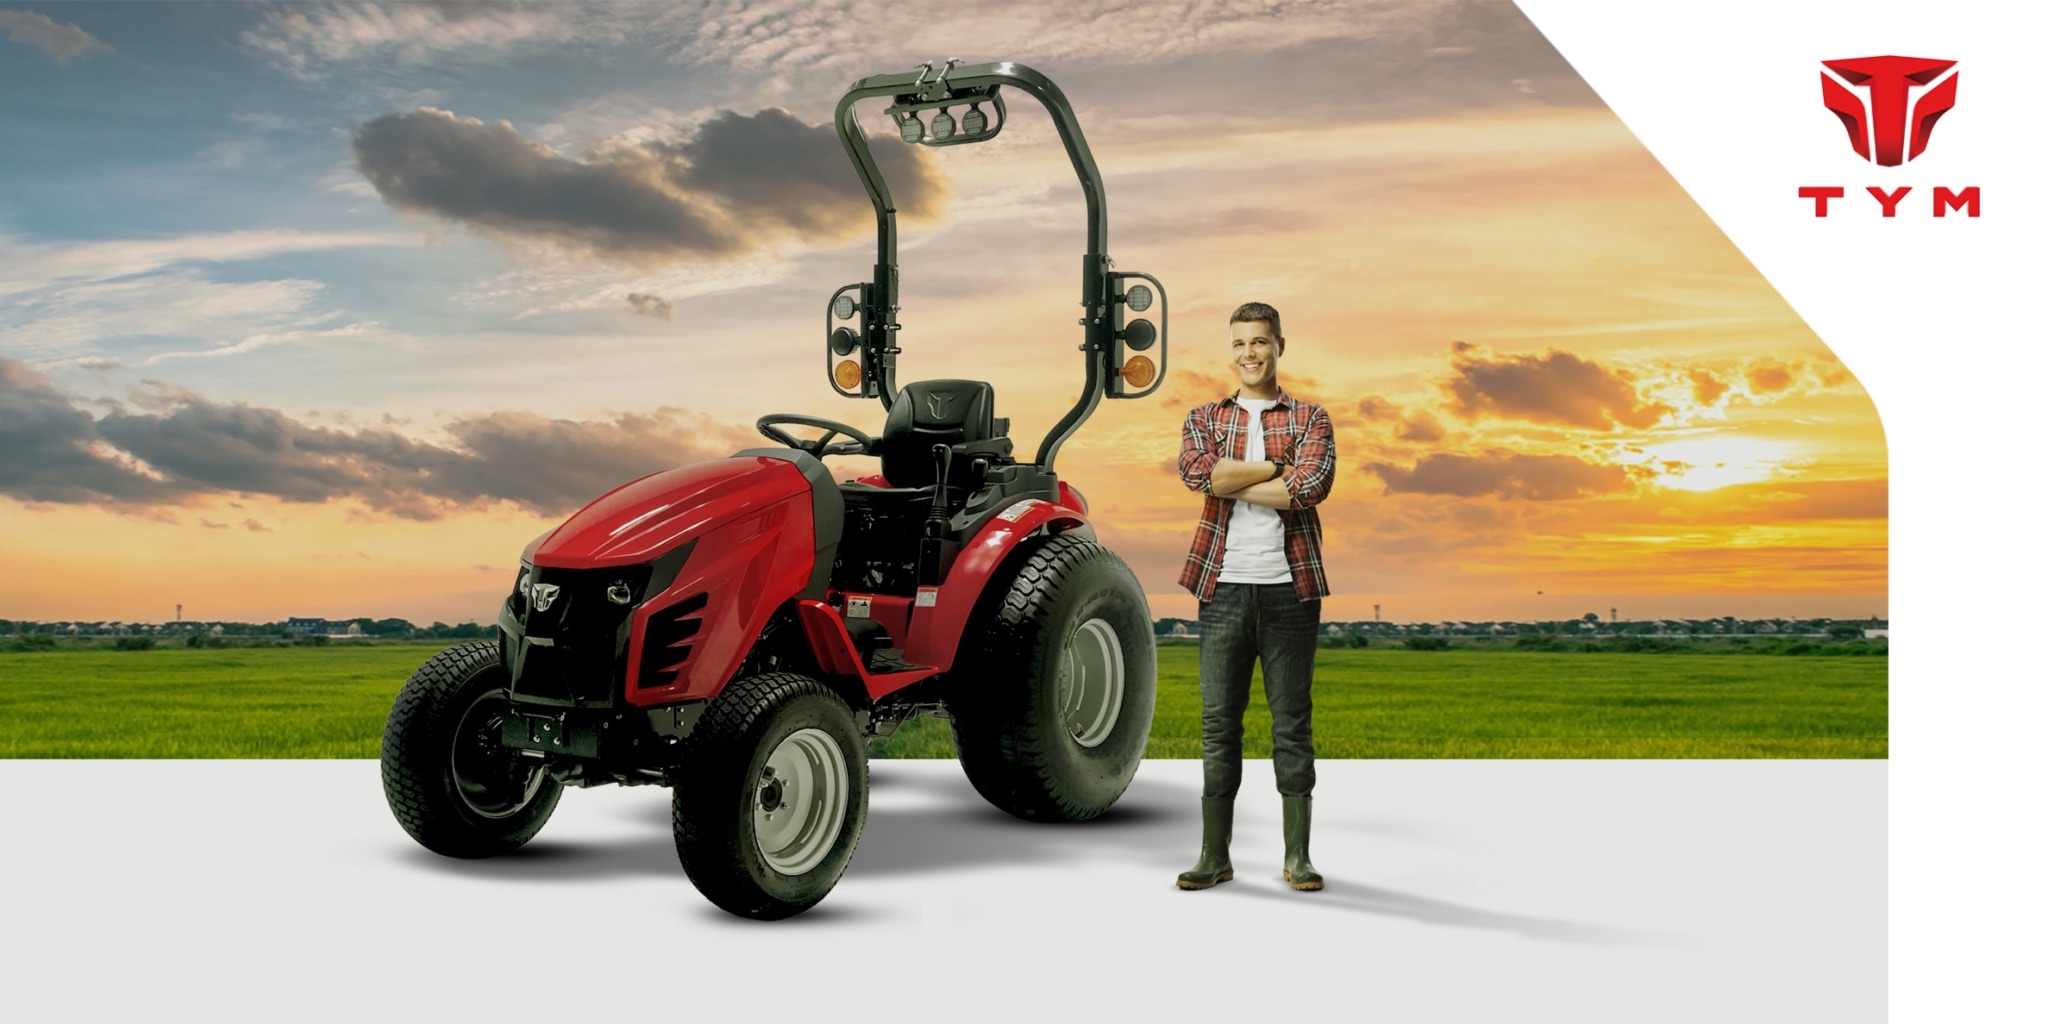 a man standing next to a red tractor. Example of printed material designed for the TYM brand